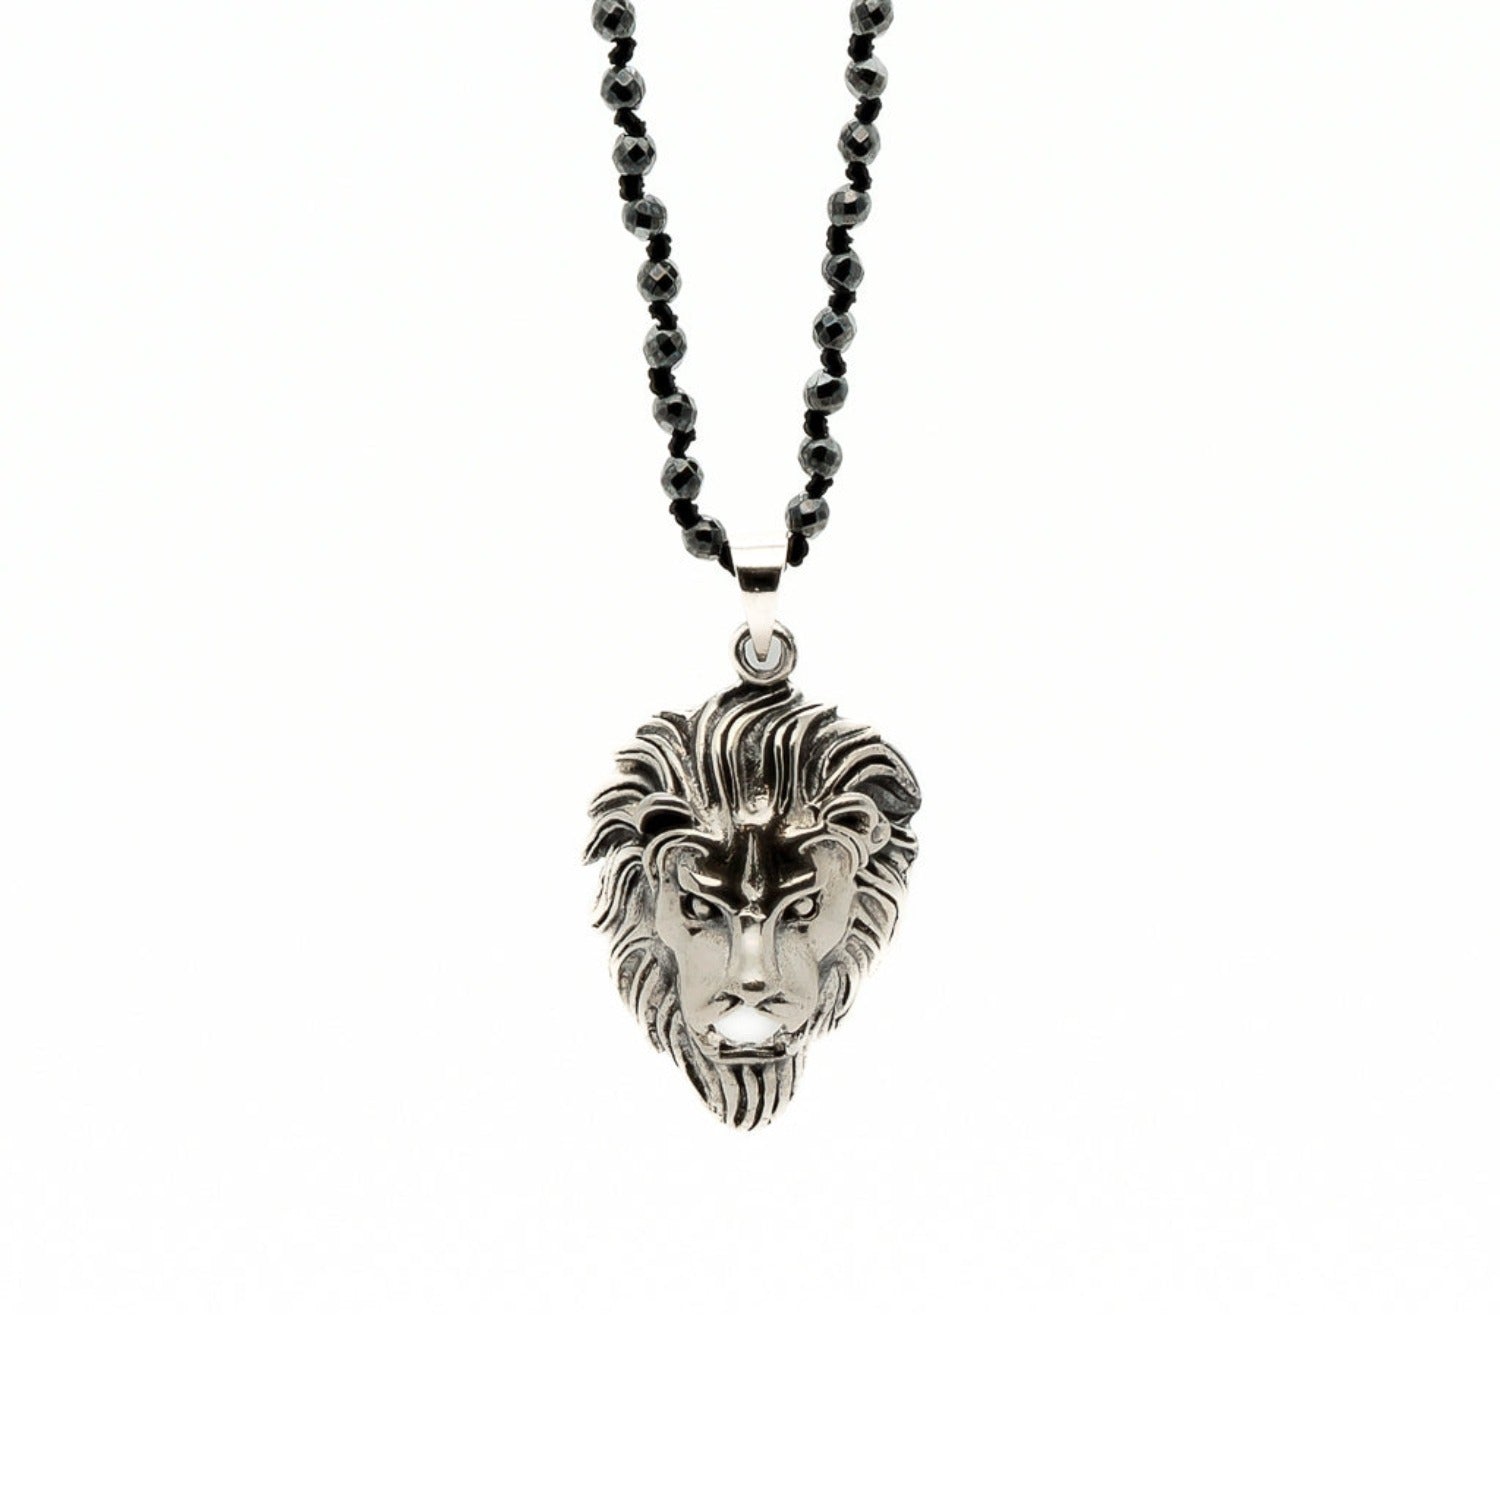 Silver Leo Necklace - Symbol of Strength and Leadership.